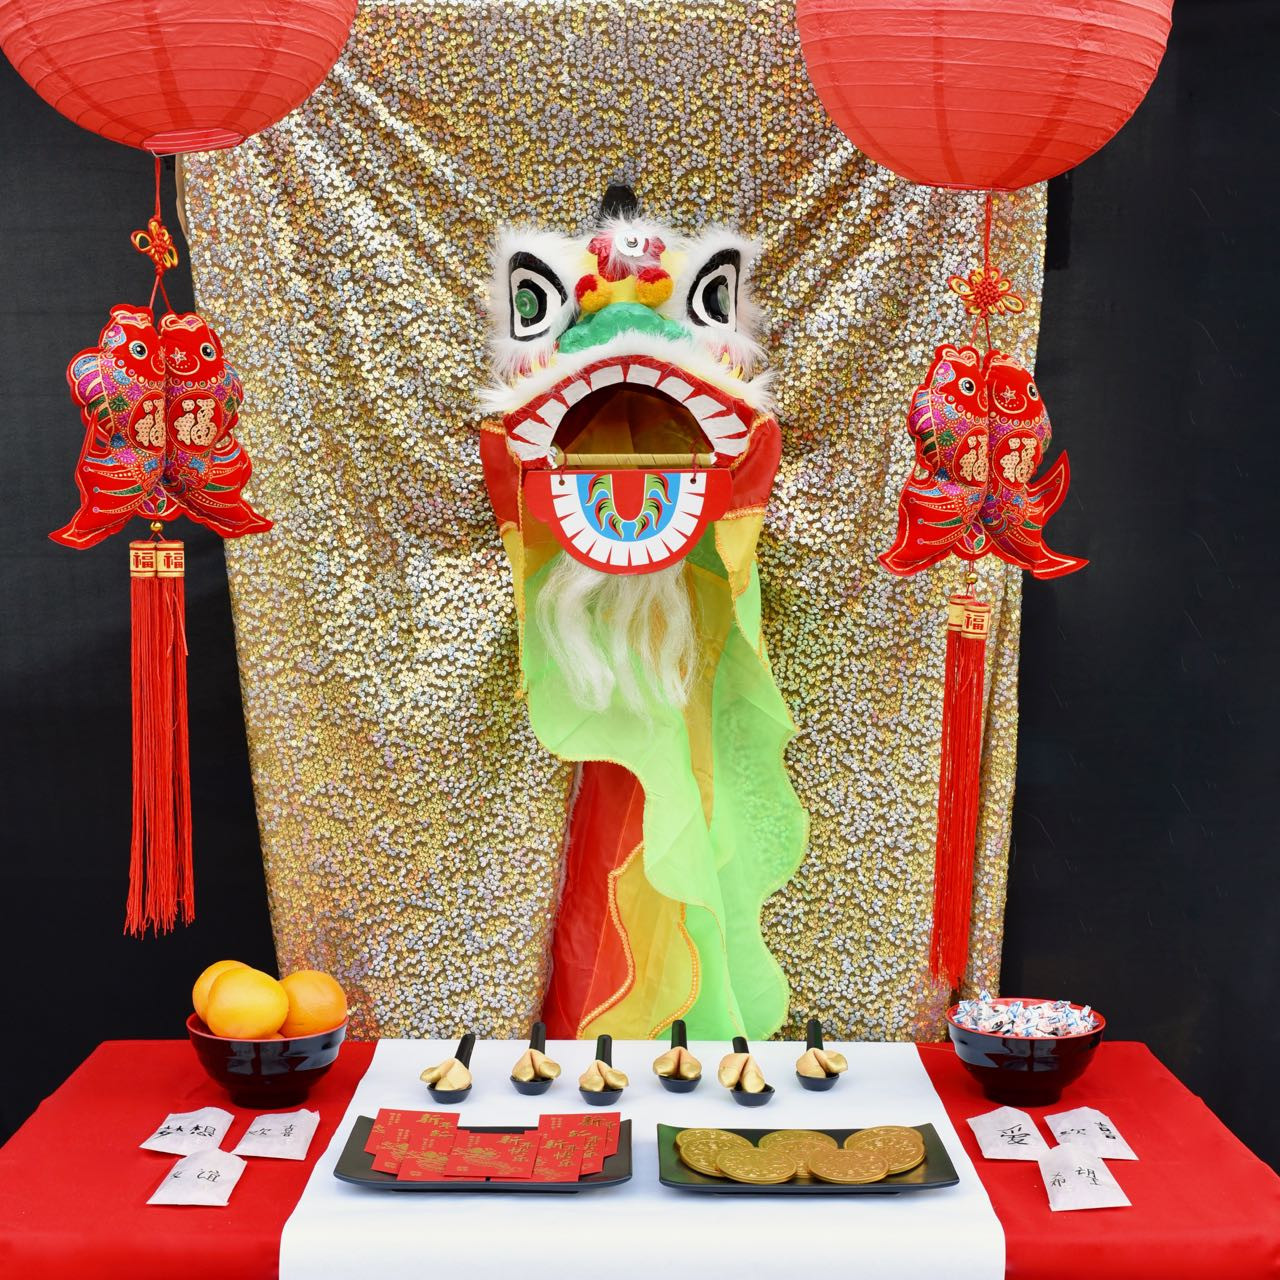 Chinese New Year Party Ideas
 How to Plan a Gorgeous Chinese New Year Party Make Life